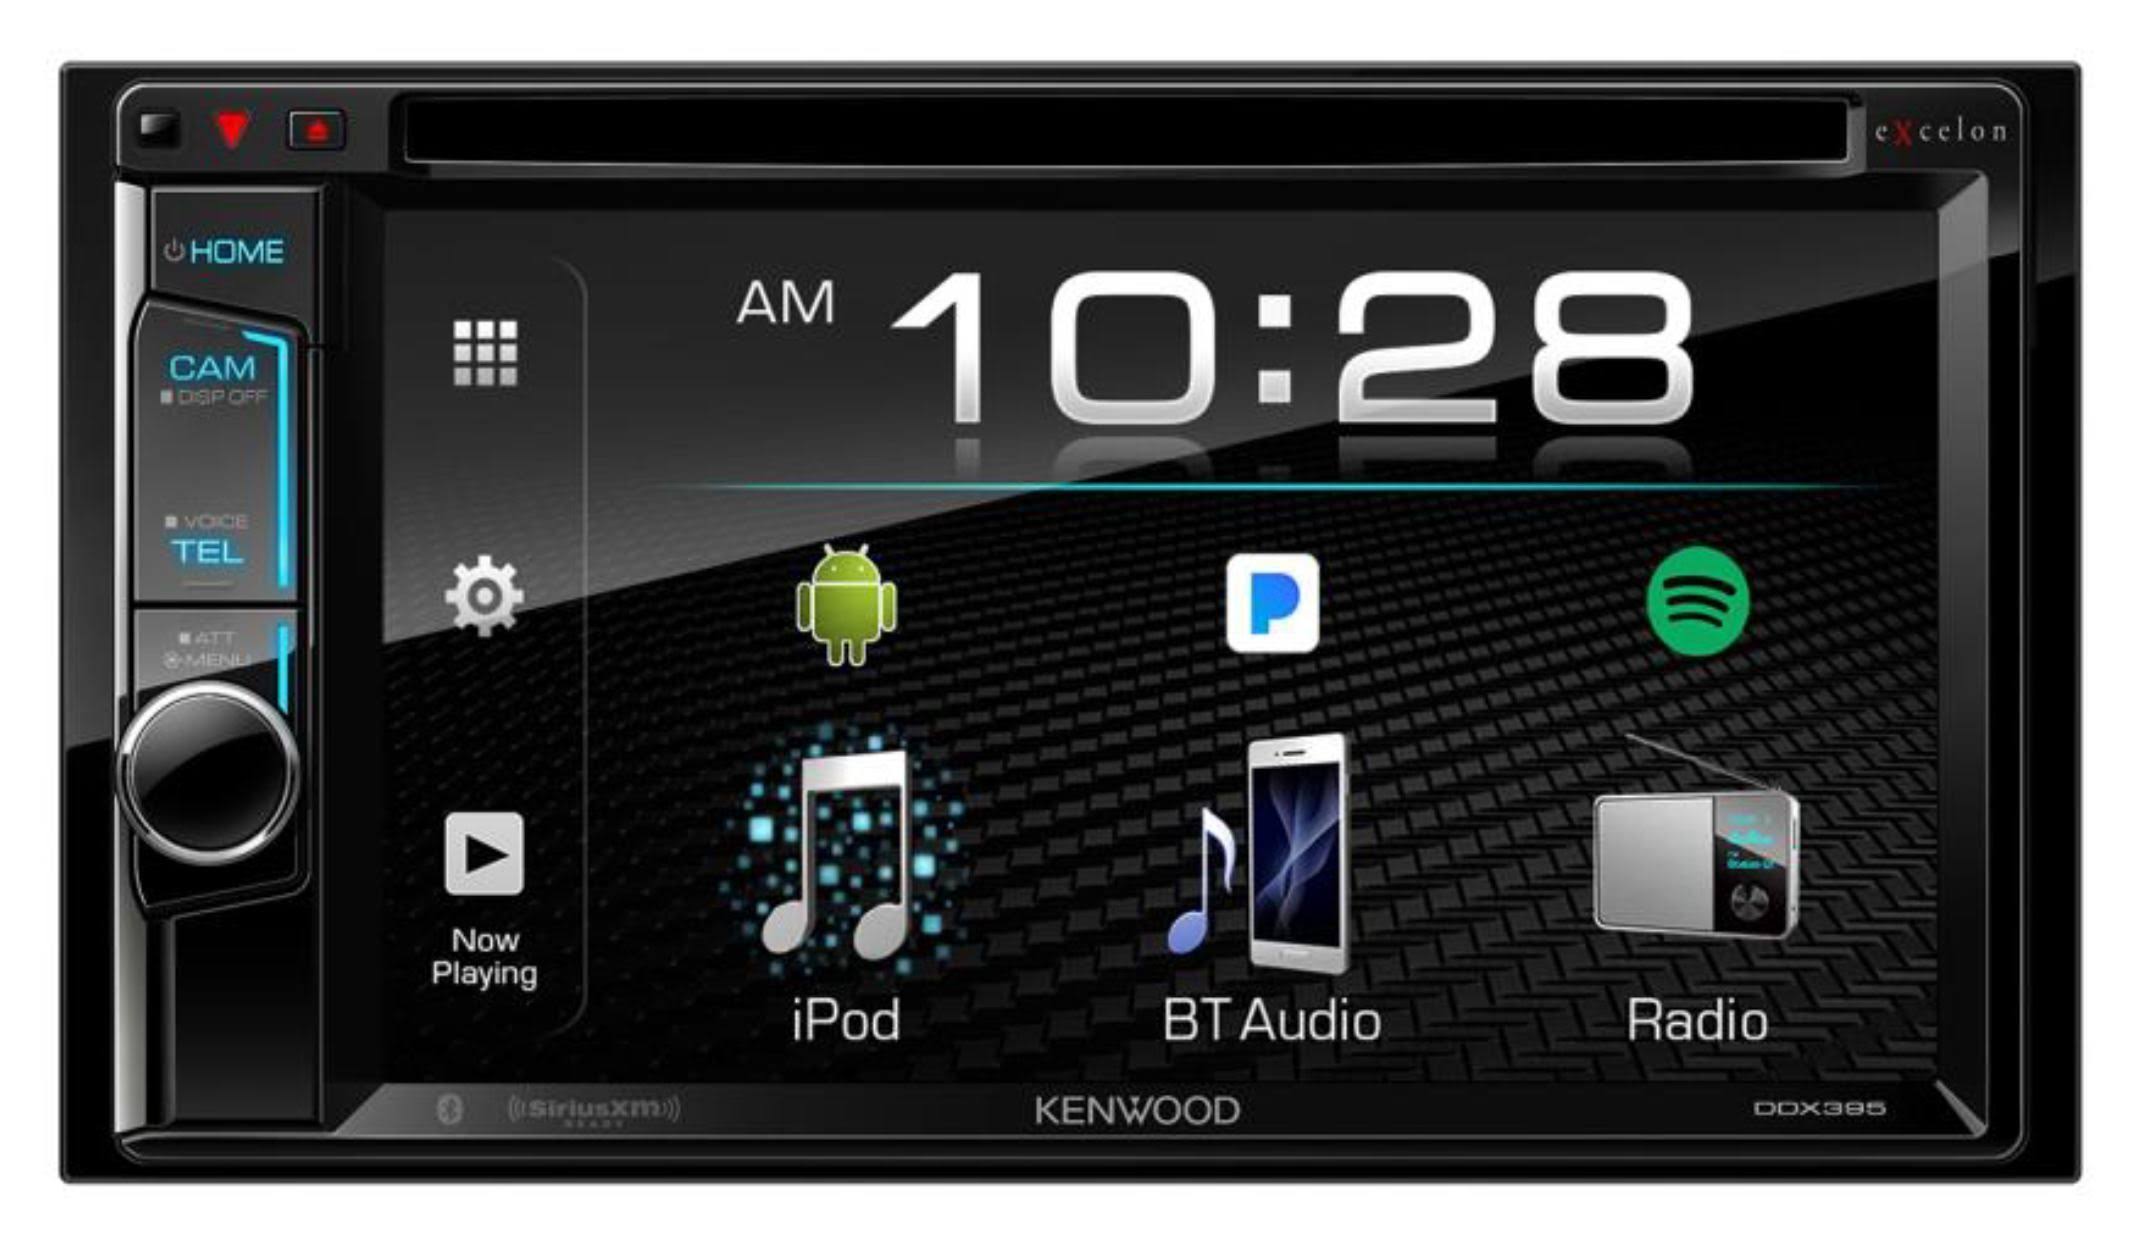 KENWOOD Excelon DDX395 In-Dash DVD 수신기 with Bluetooth